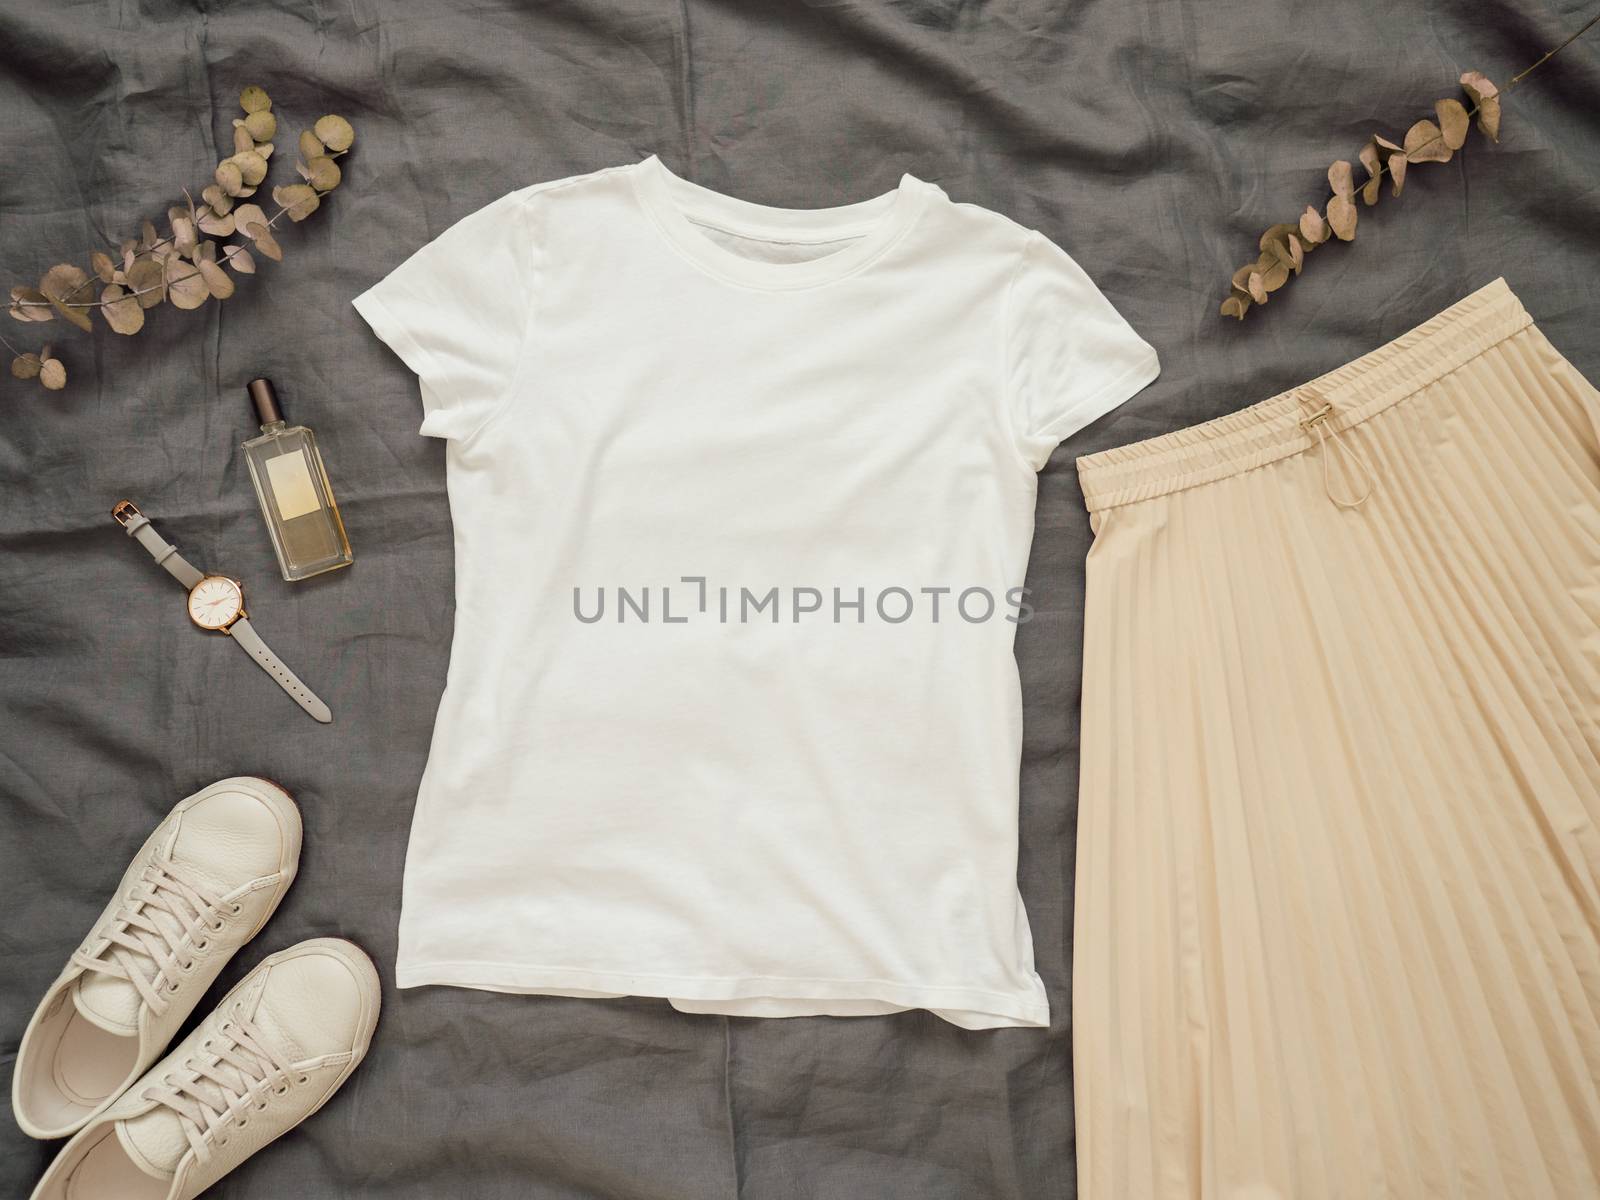 Fashionable female look with white empty t-shirt, cream pleated skirt and white sneakers. Top view of white blank t-shirt with short sleeves over gray bed linen. Mock up for t-shirt print design.